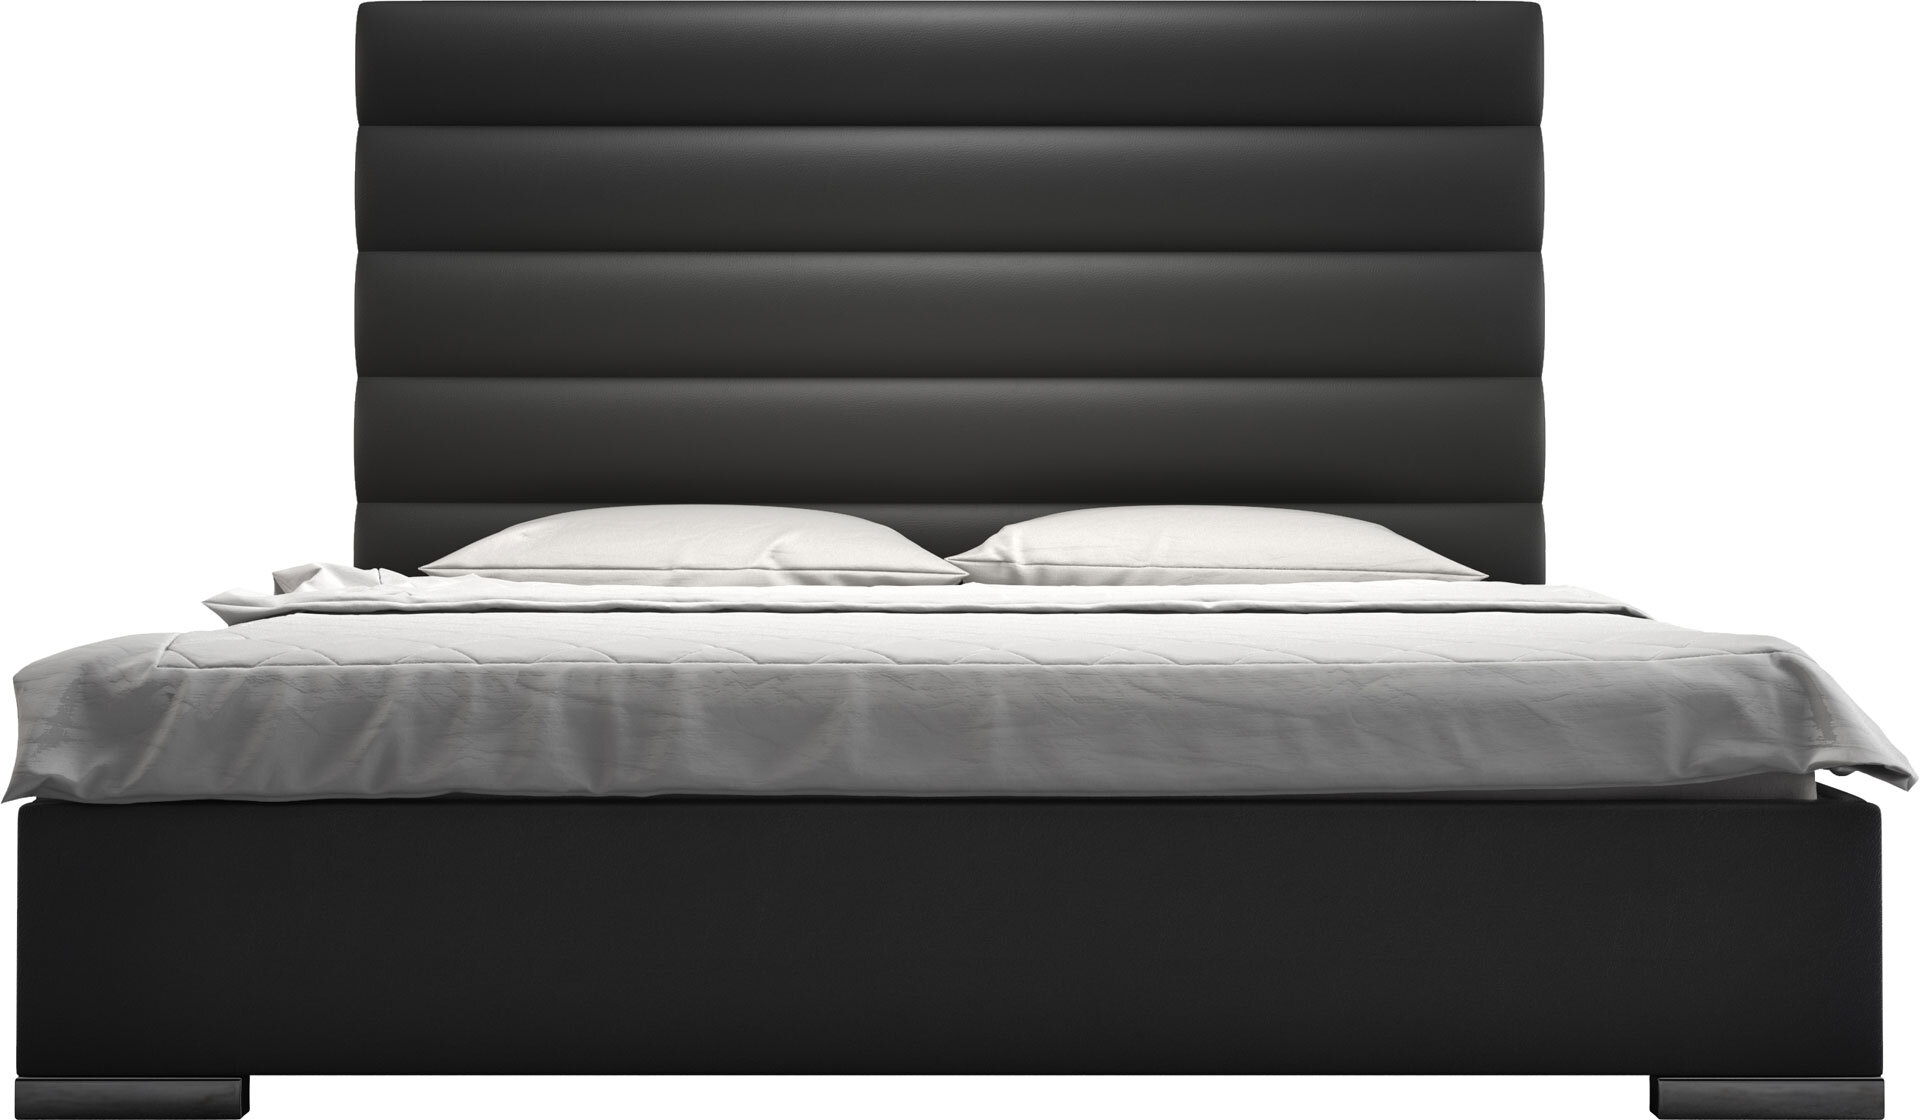 See? 31+ Truths Of Black King Beds They Missed to Let You in! - Sehr11309